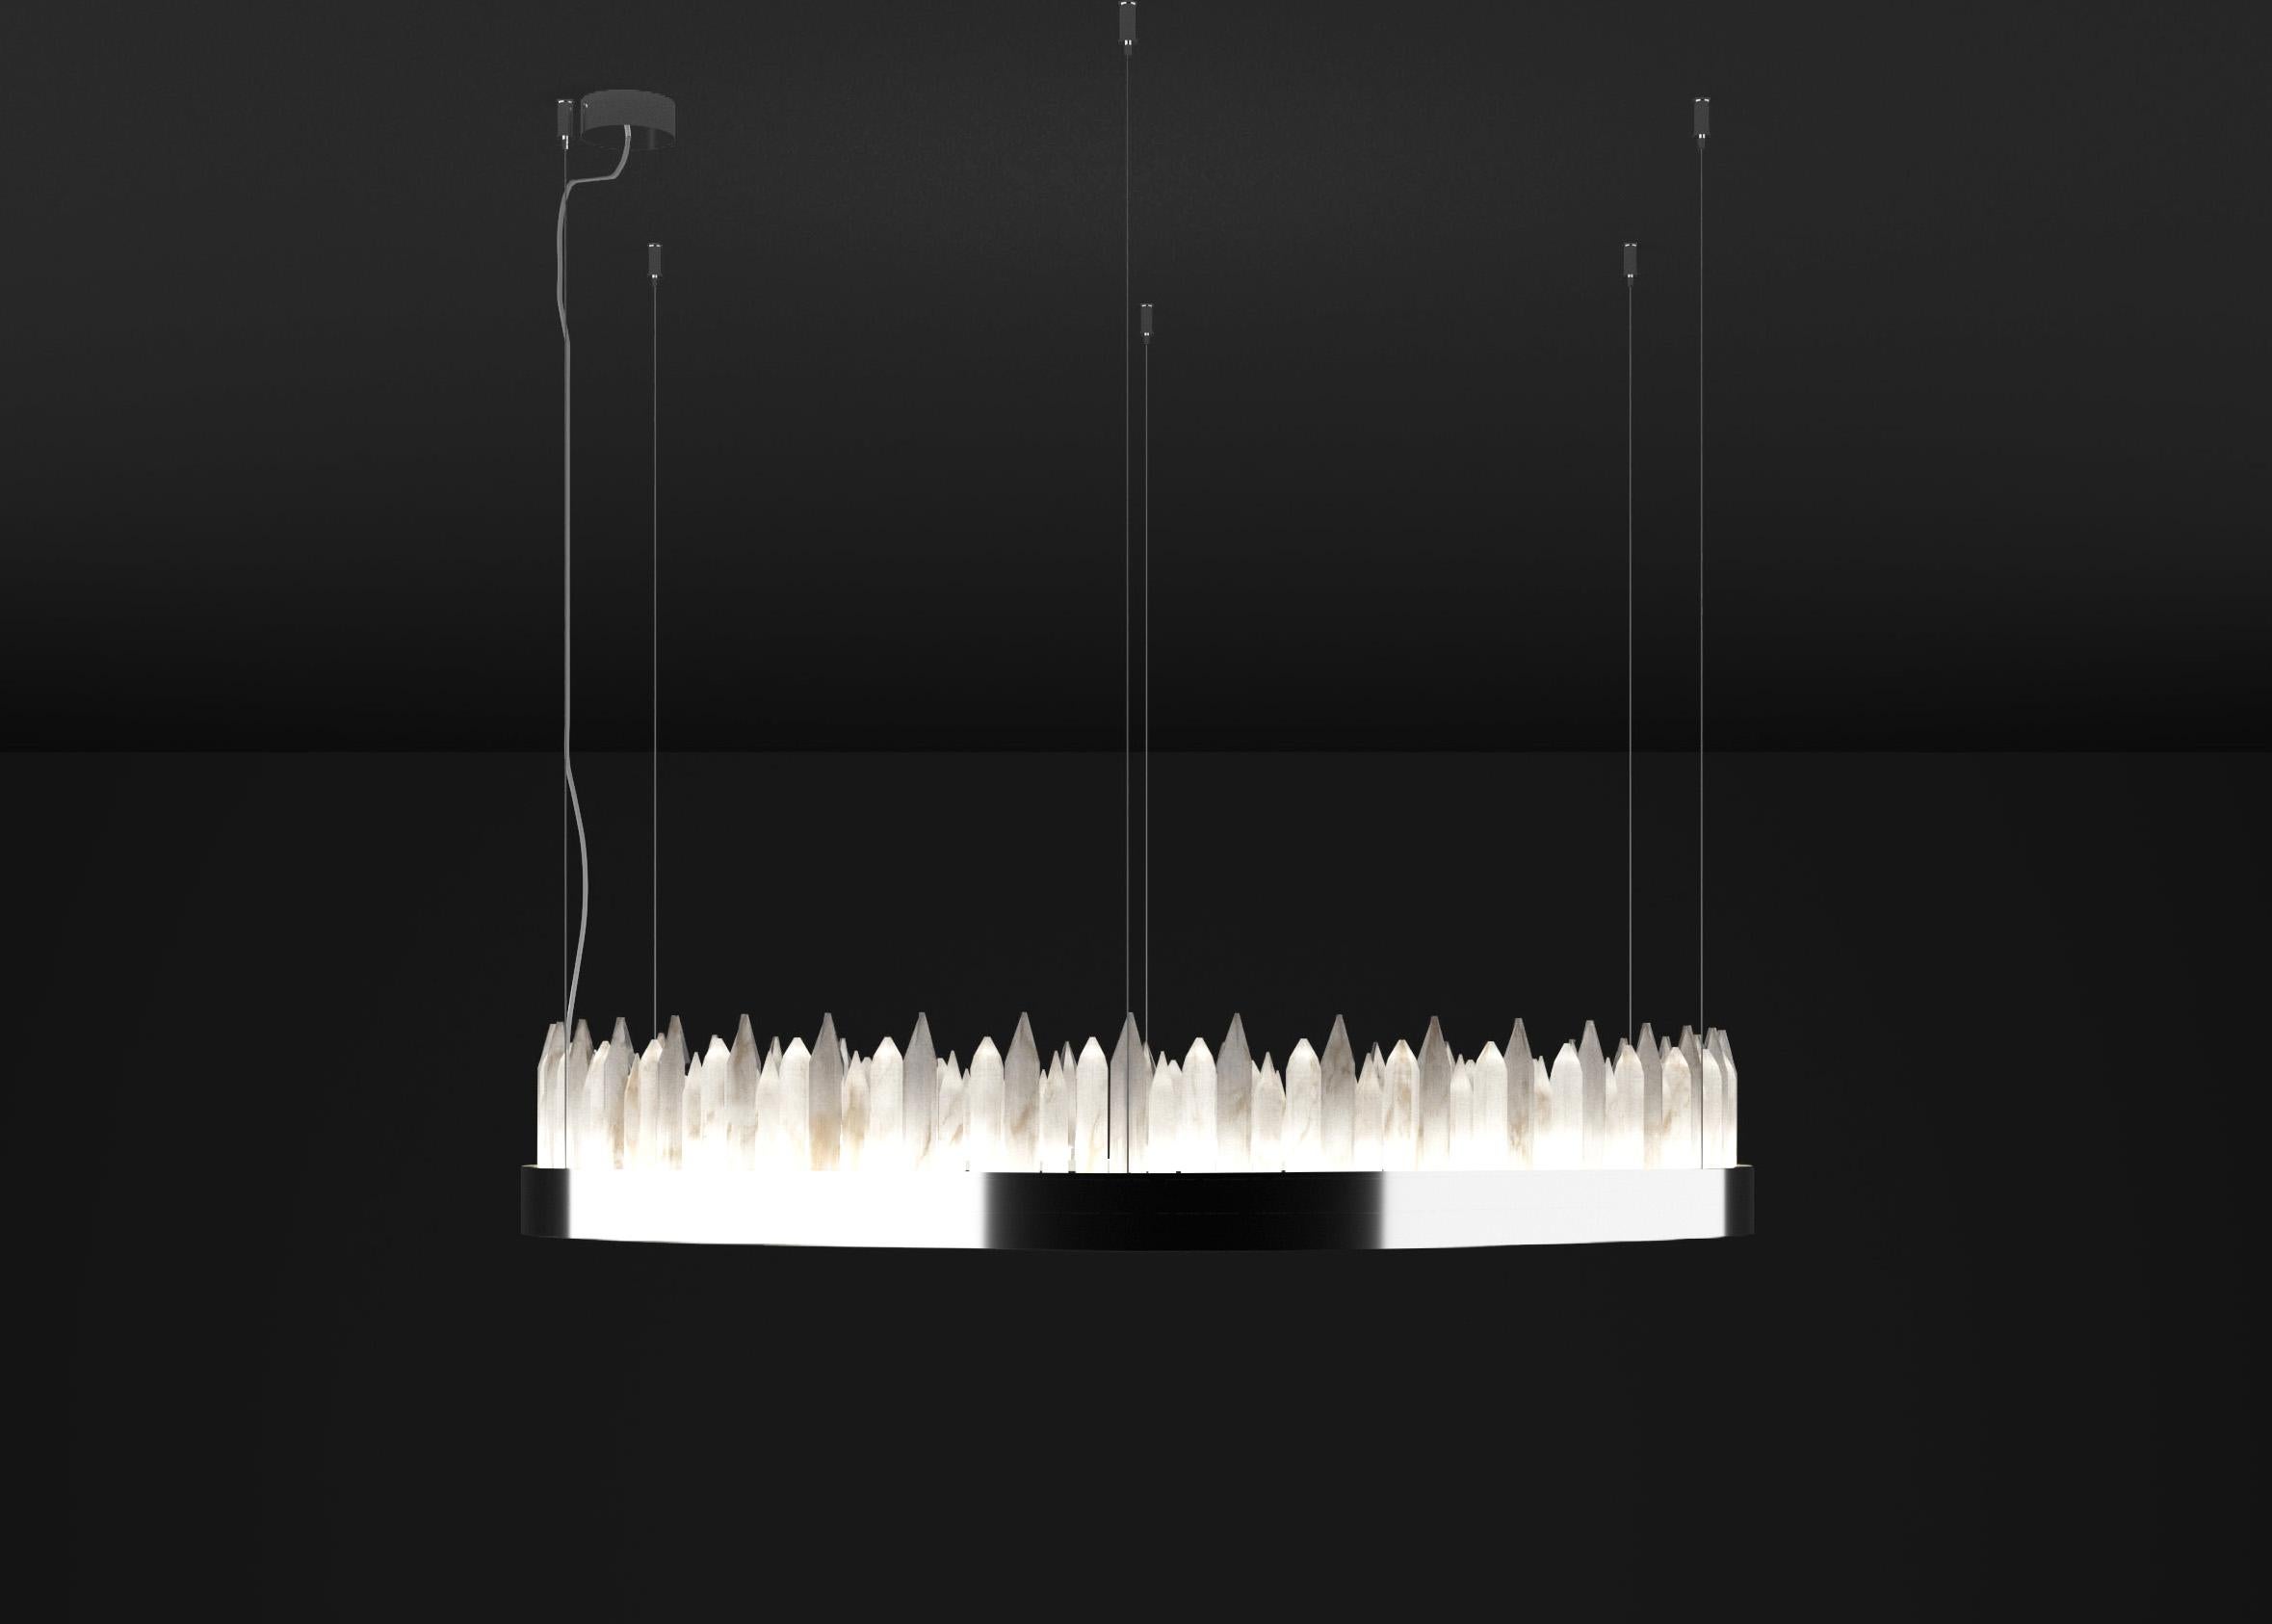 Urano Shiny Silver 120 Pendant Light 3 by Alabastro Italiano
Dimensions: Ø 120 x H 20 cm.
Materials: Glass and shiny silver metal.

2 x Strip LED, 162 Watt 16286 Lumen, 24 V, 3000 K.

Available in different sizes: Ø 60, Ø 80, Ø 100 and Ø 120 cm.